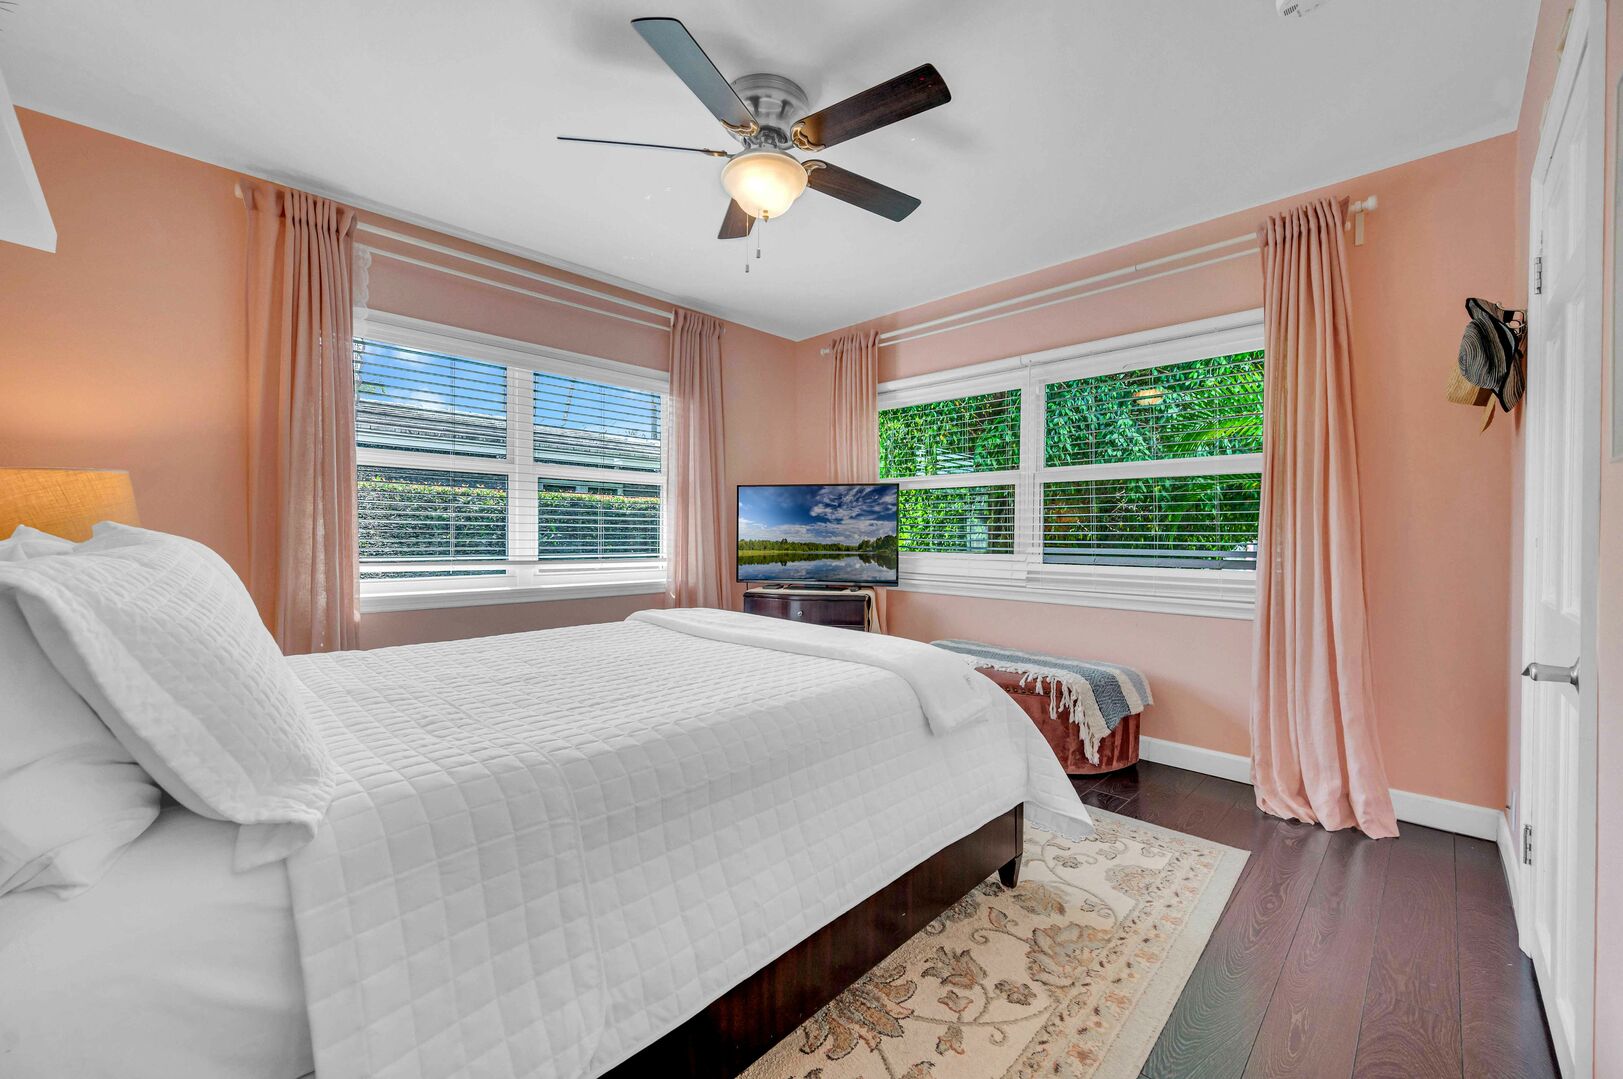 The third bedroom features a queen-sized bed and a Smart TV.